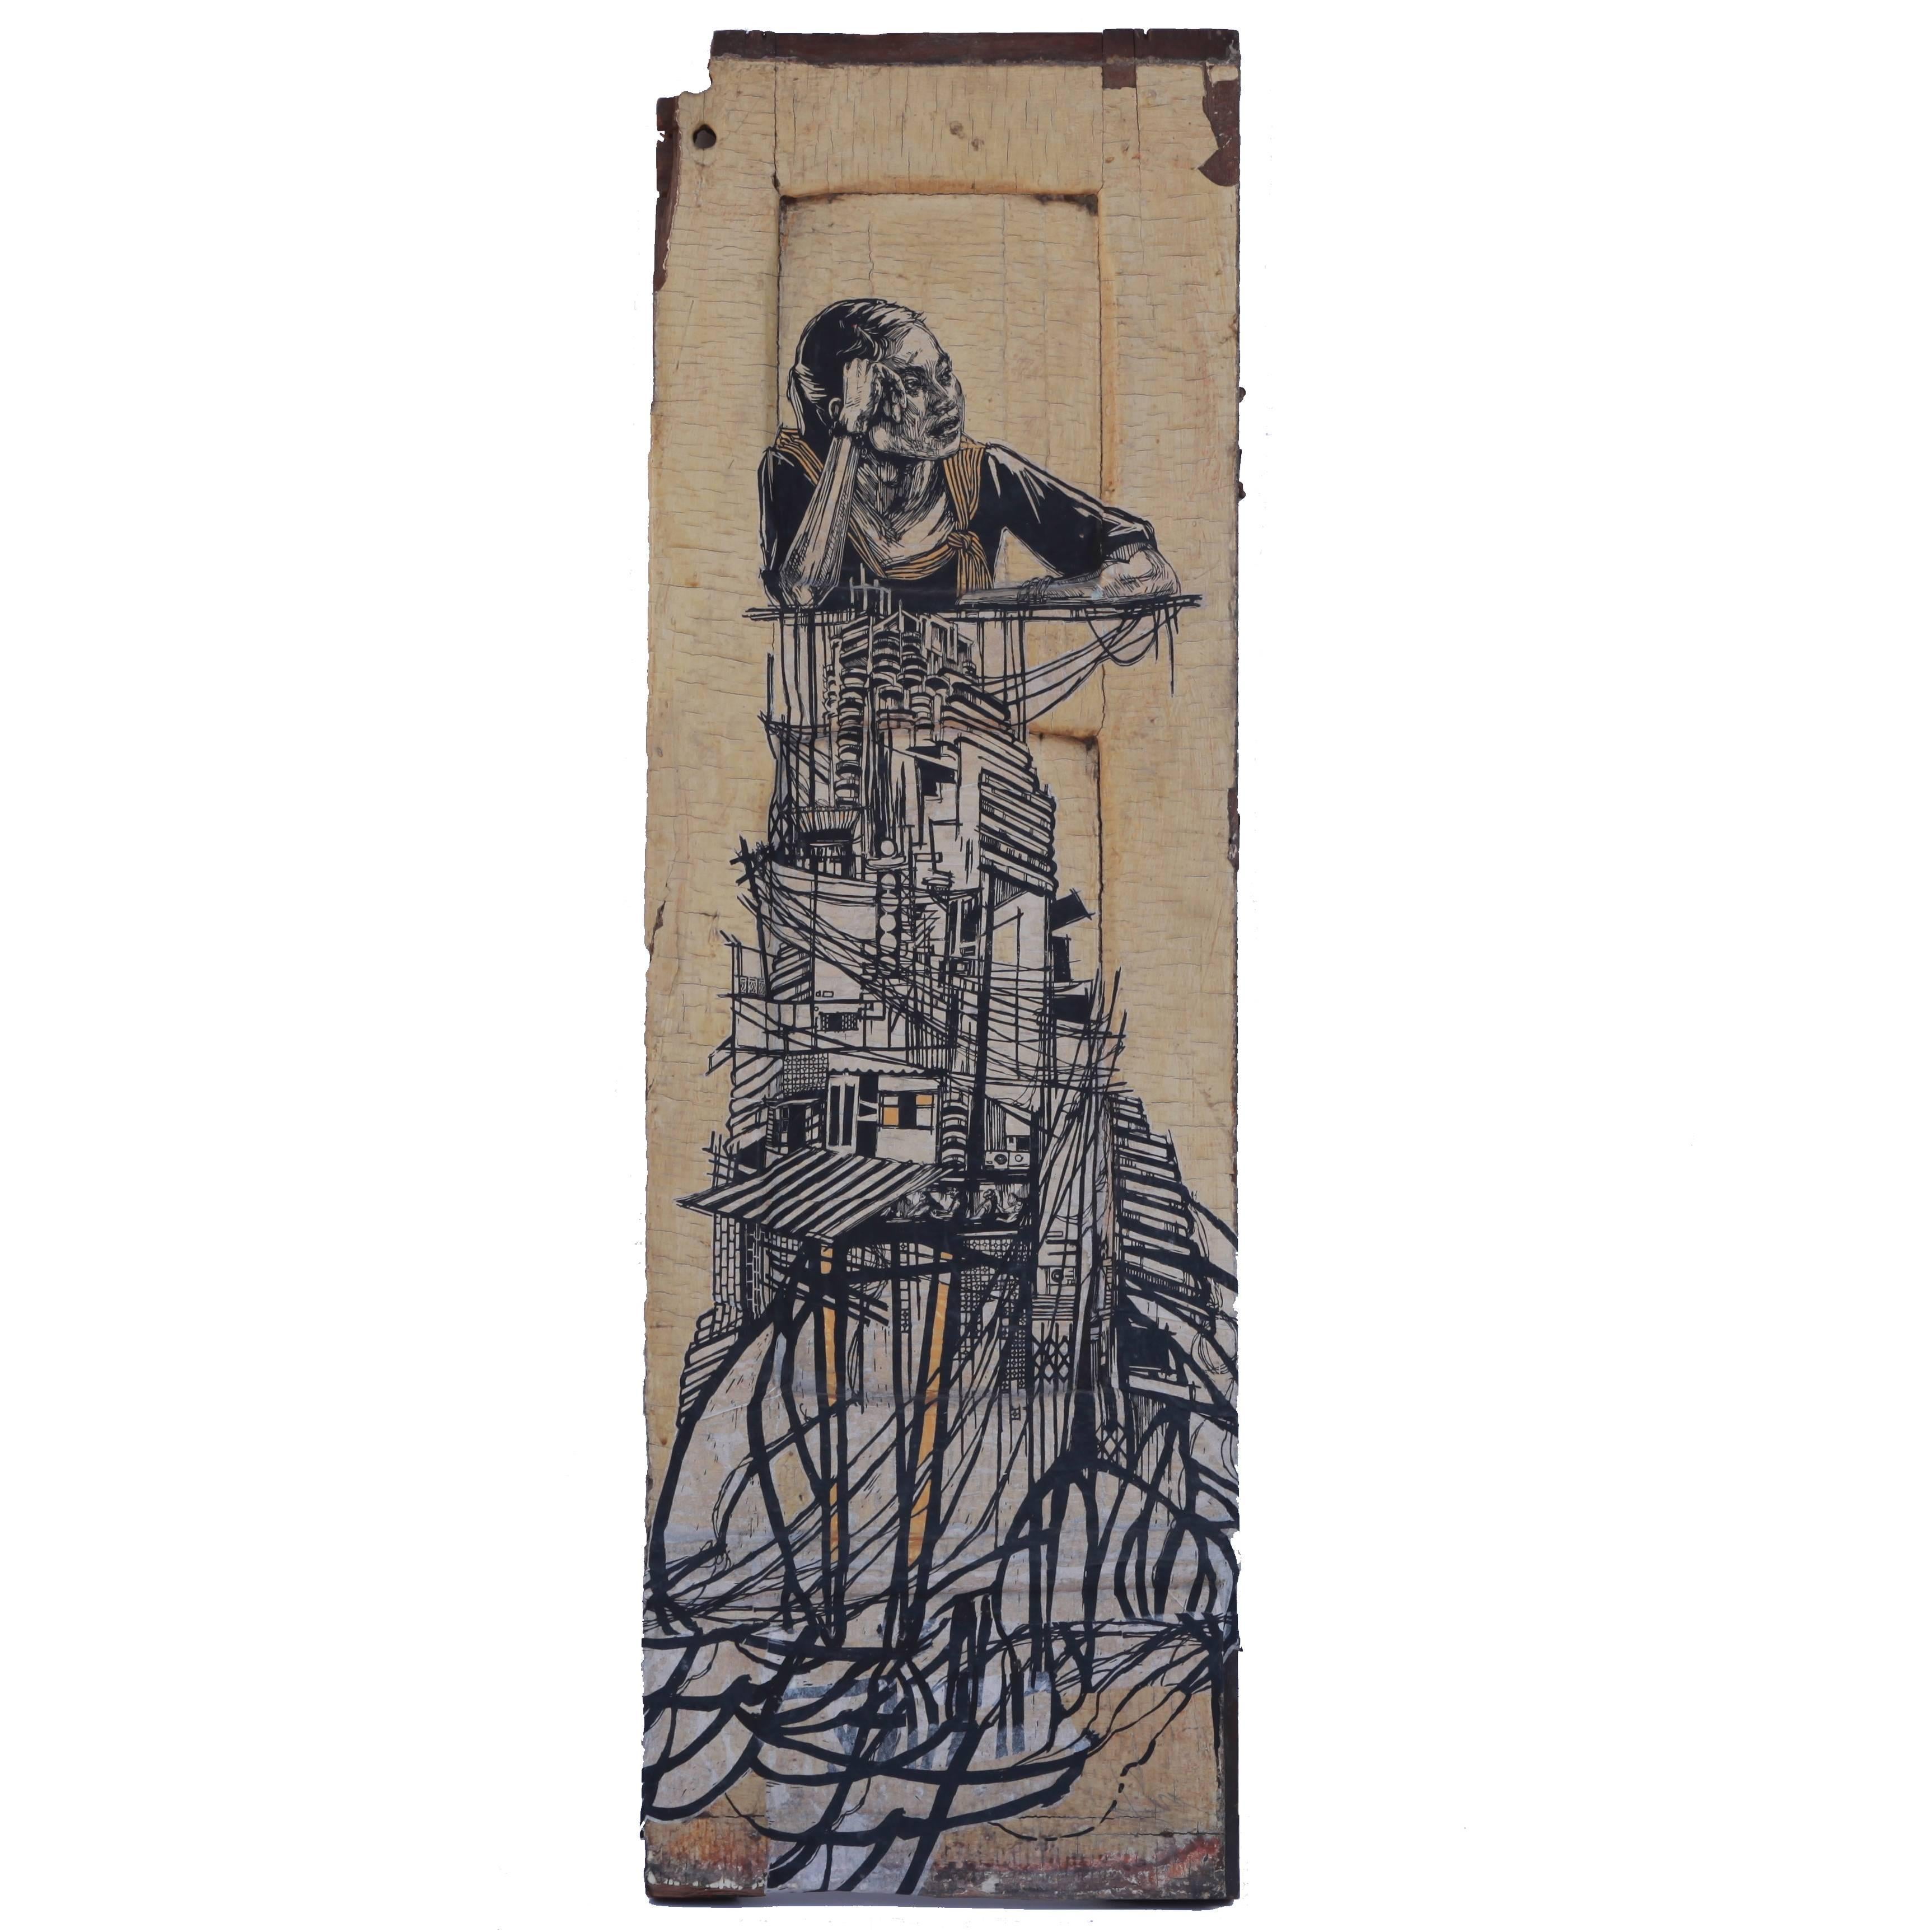 Swoon "Girl from the Rangoon Provence" Wheat Paste on Found Object For Sale